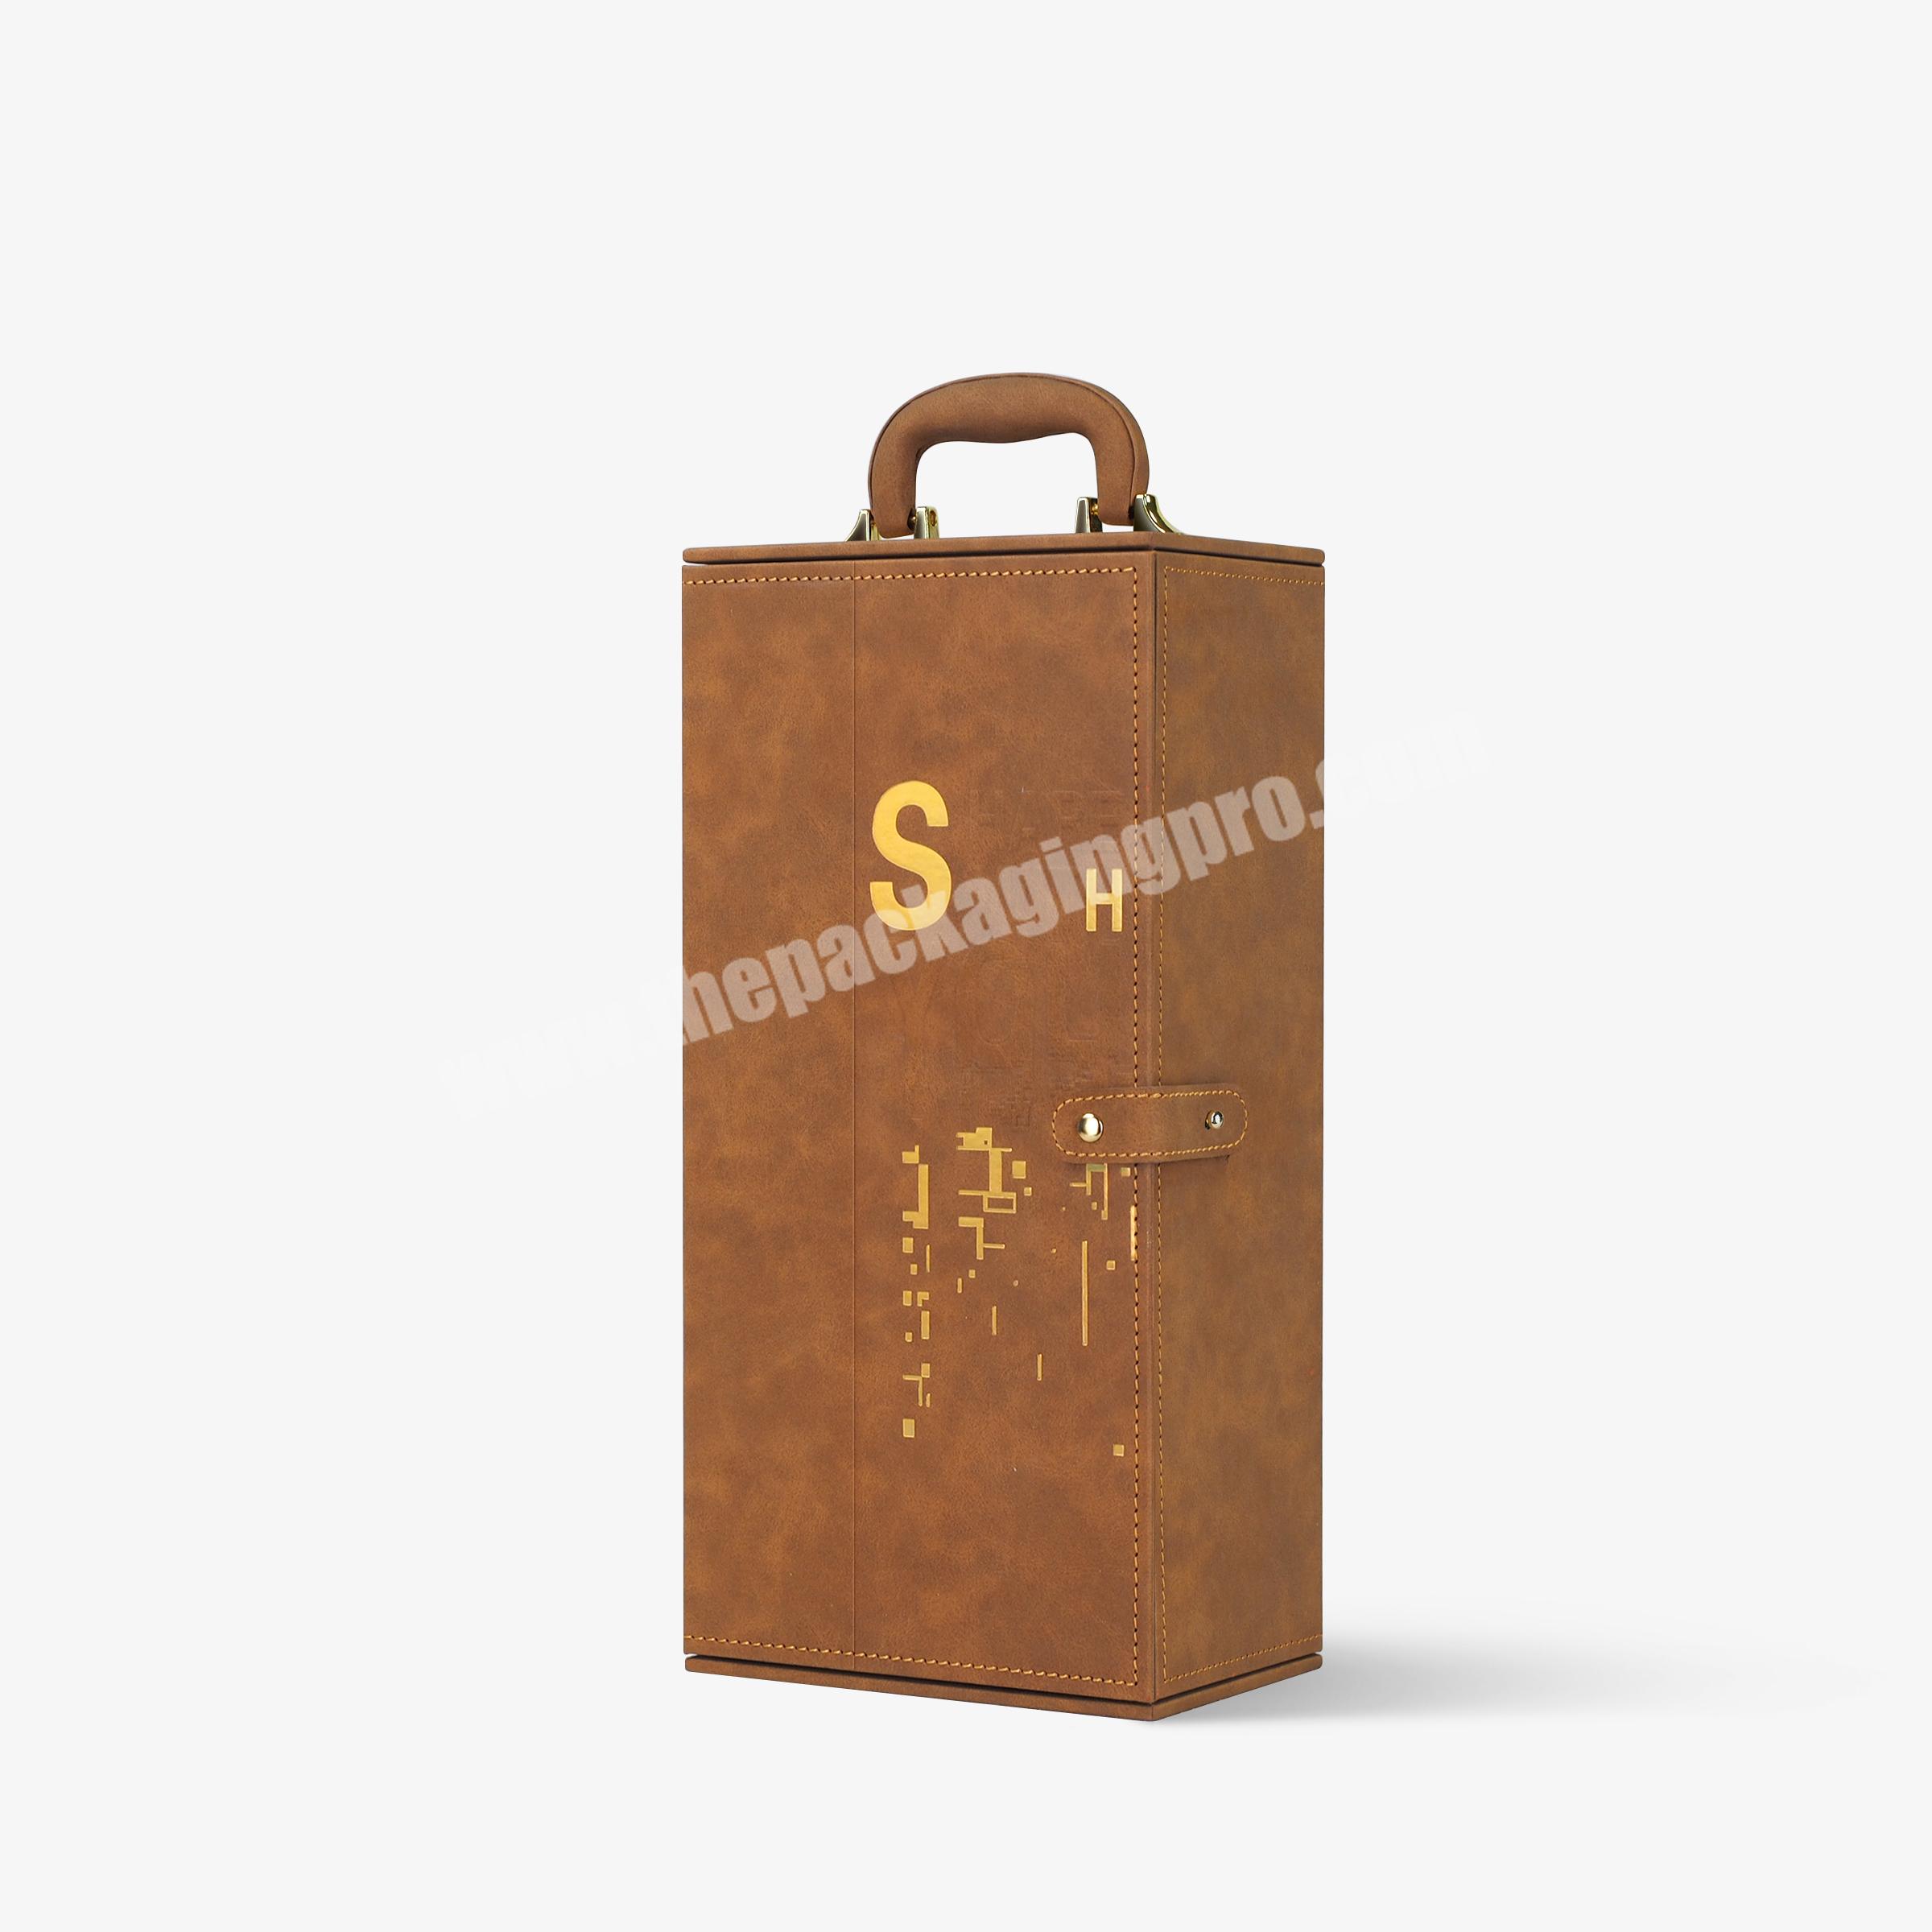 OEM luxury wine bottle boxes hot sale leather wine box wine packaging boxes